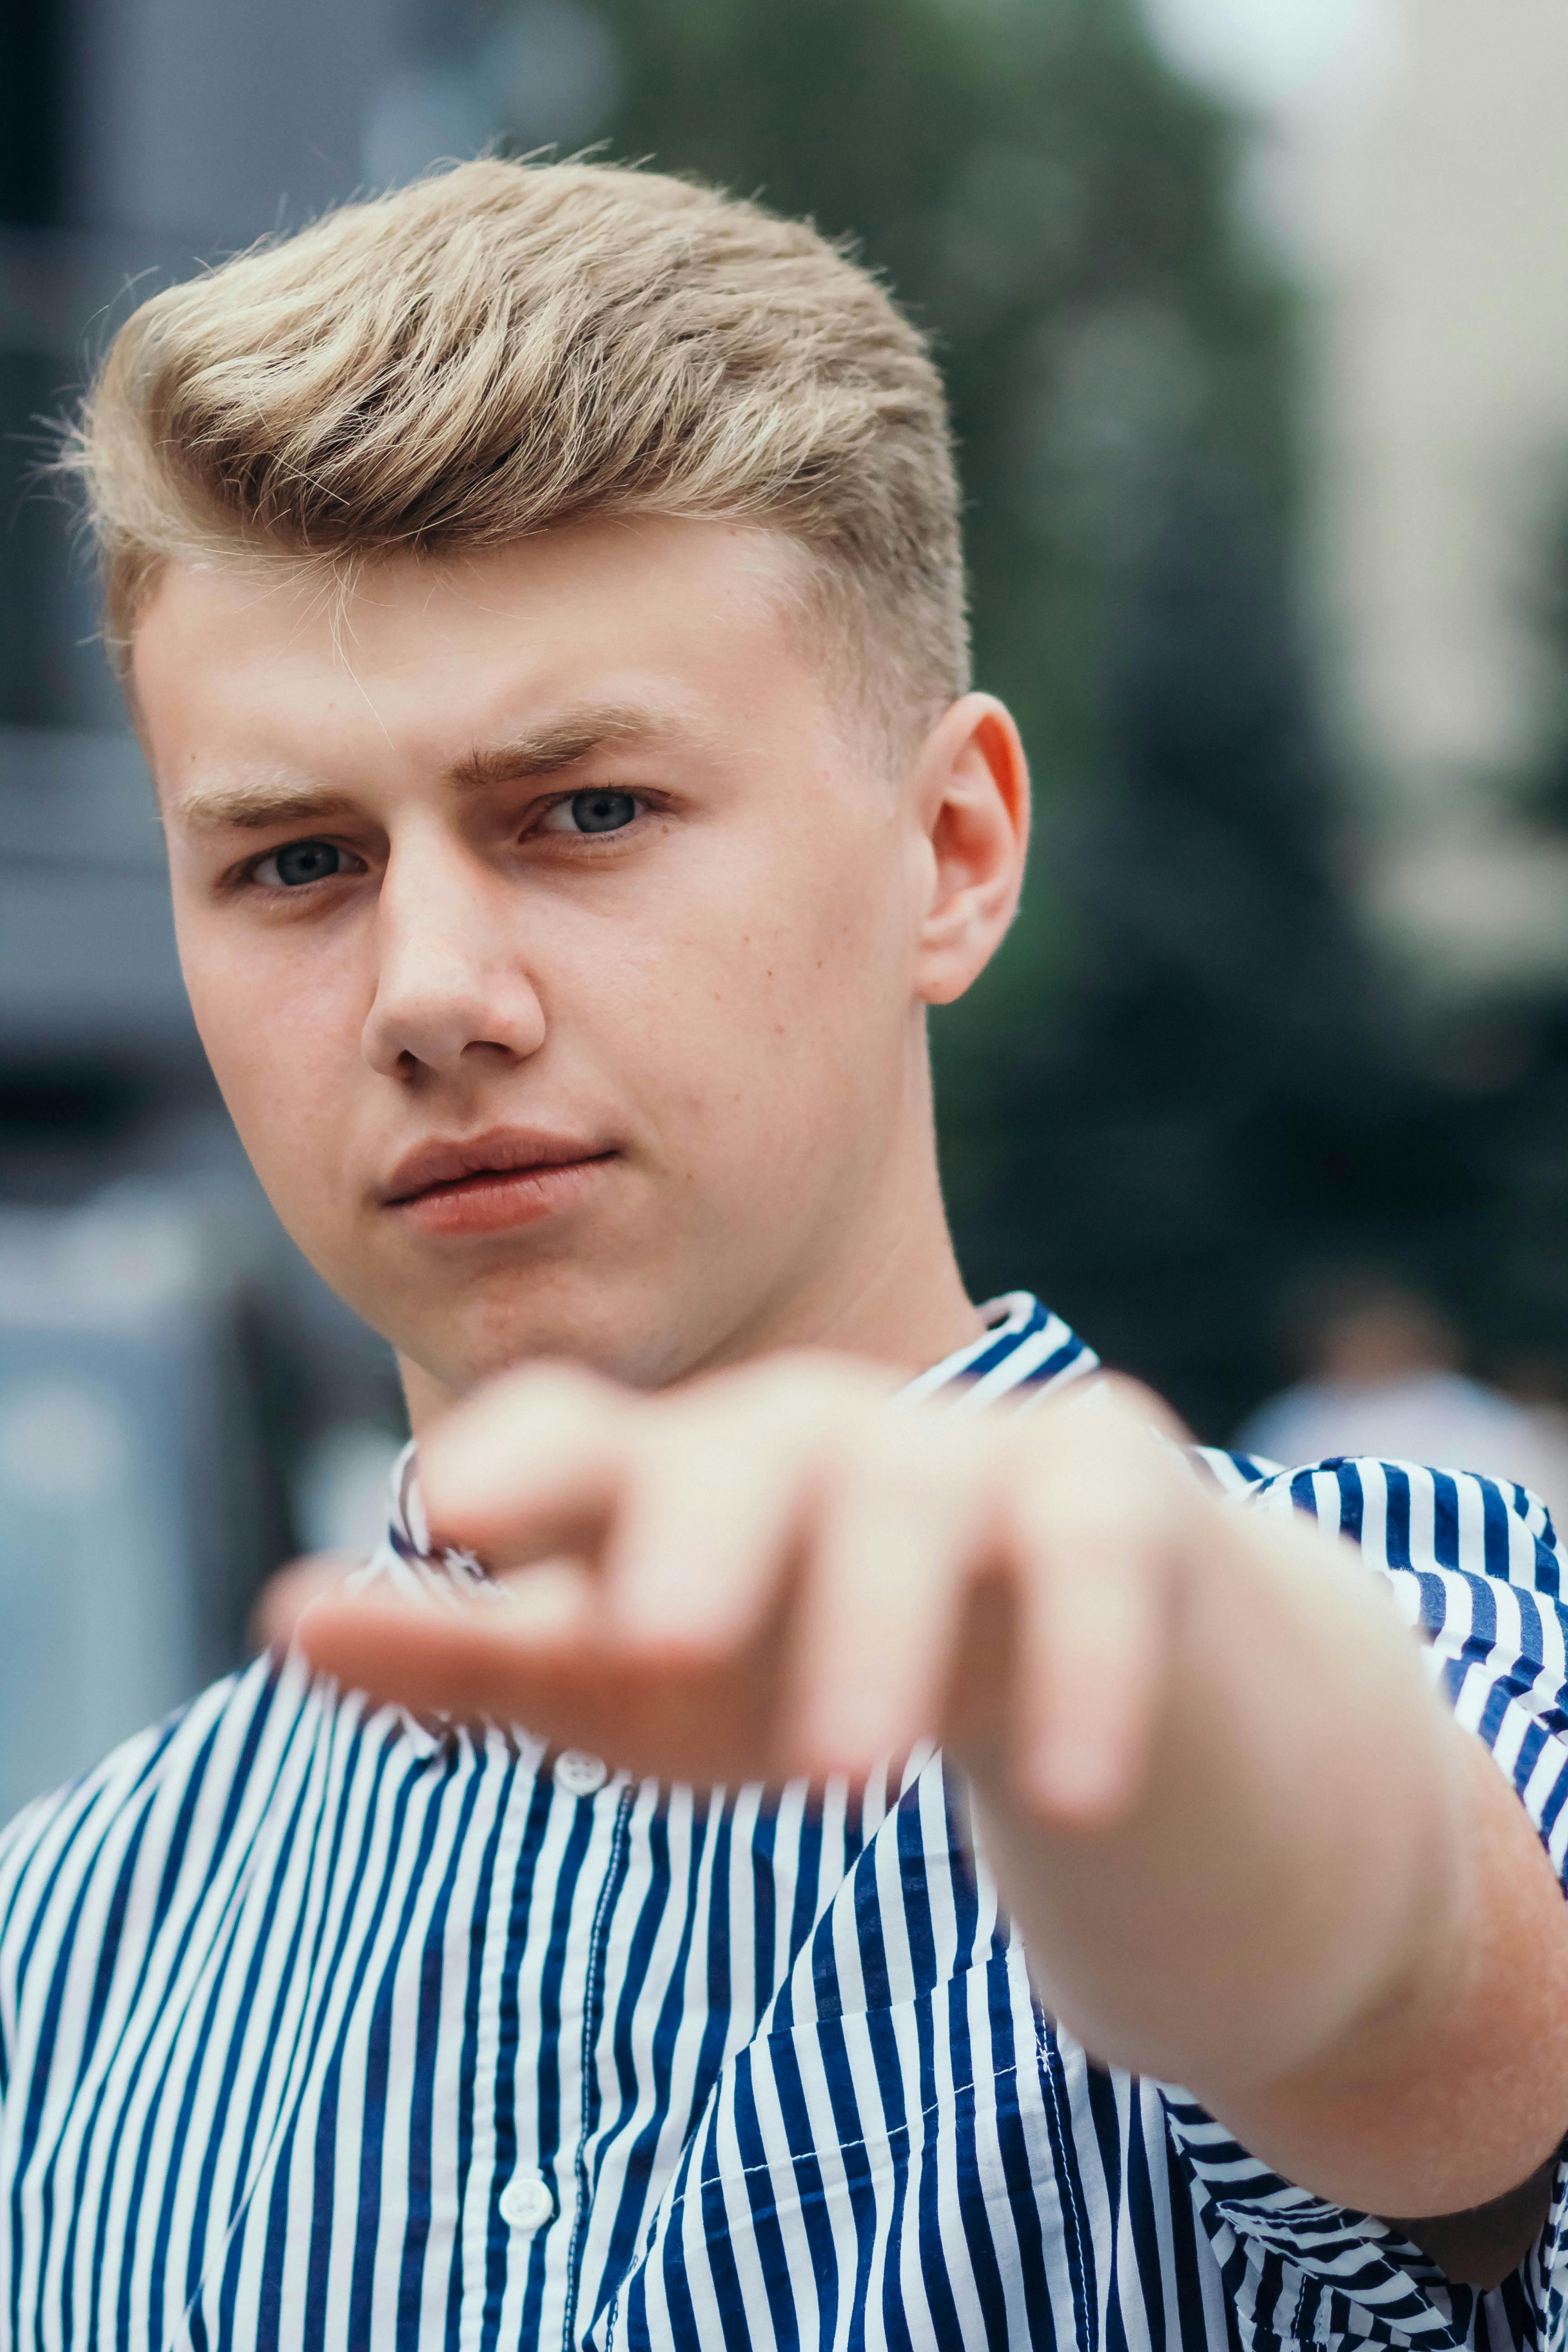 Young man with blonde hair. | Photo: Pexels